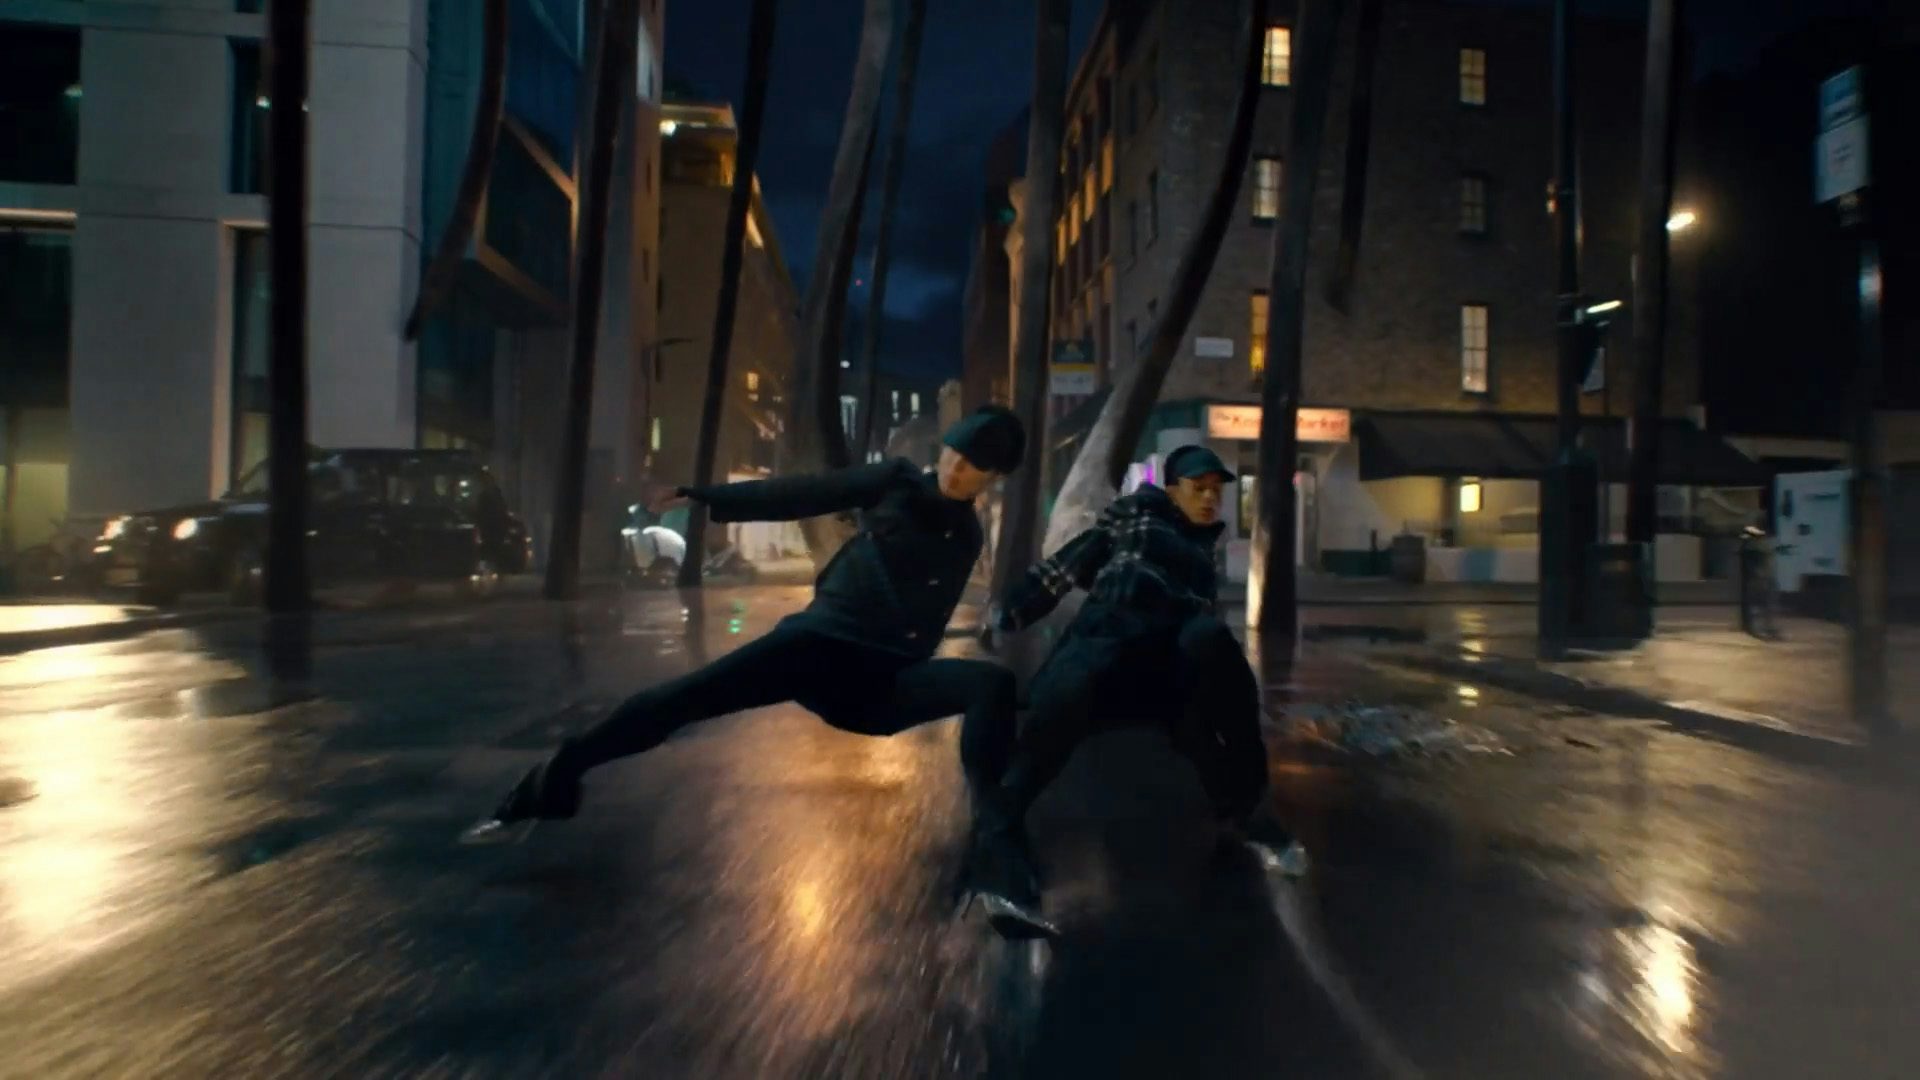 Still image of two dancers being dragged by a creature in the streets from the Burberry Night Creatures campaign film by Megaforce